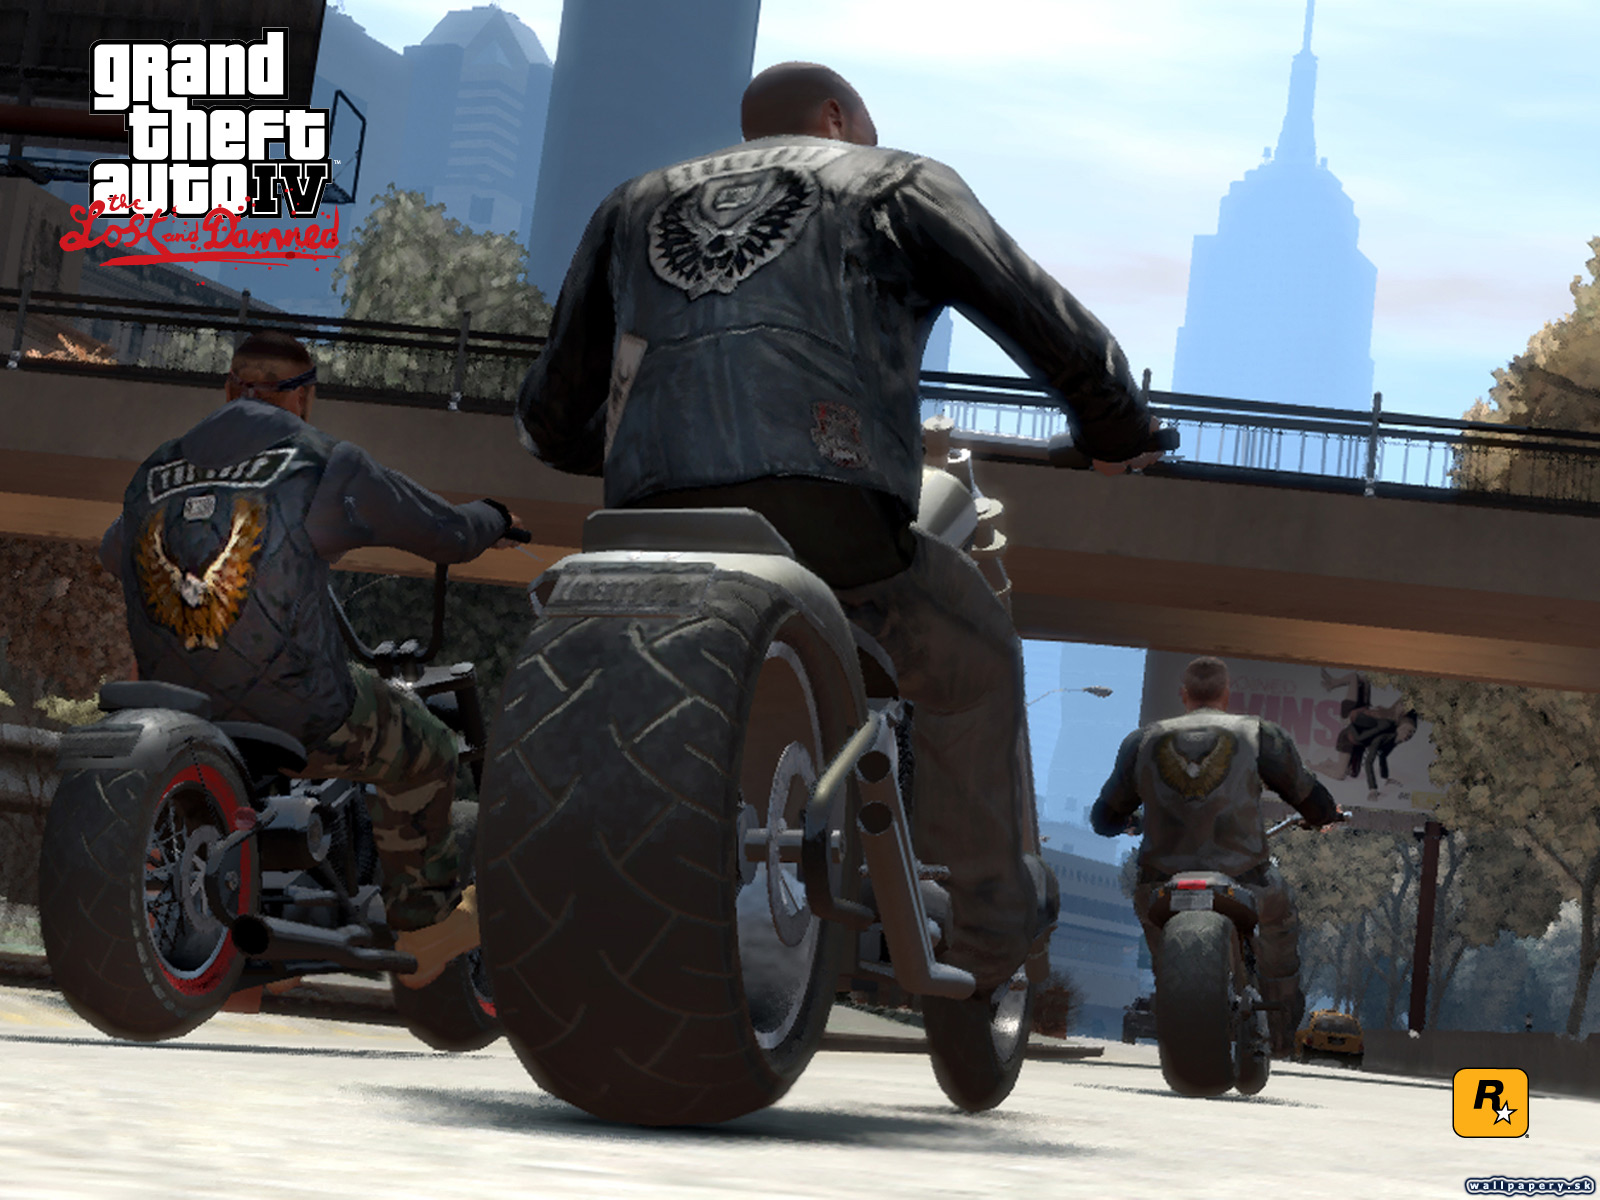 Grand Theft Auto IV: The Lost and Damned - wallpaper 9